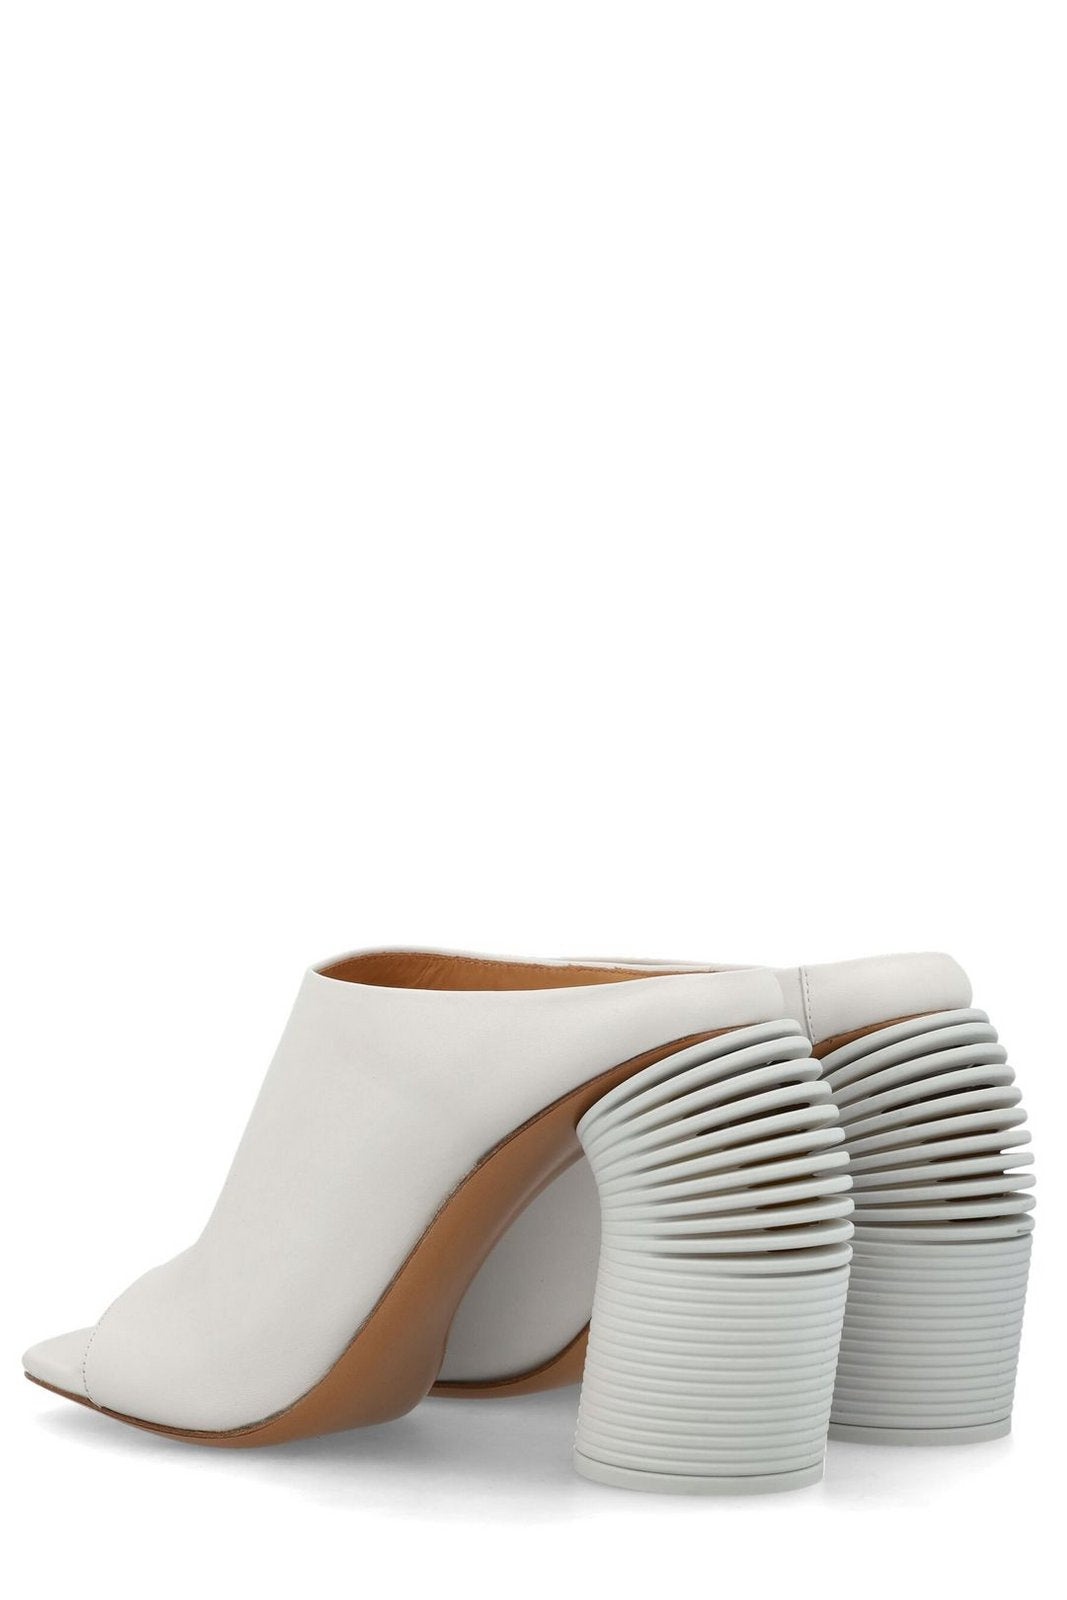 Off-White Spring Open Toe Mules